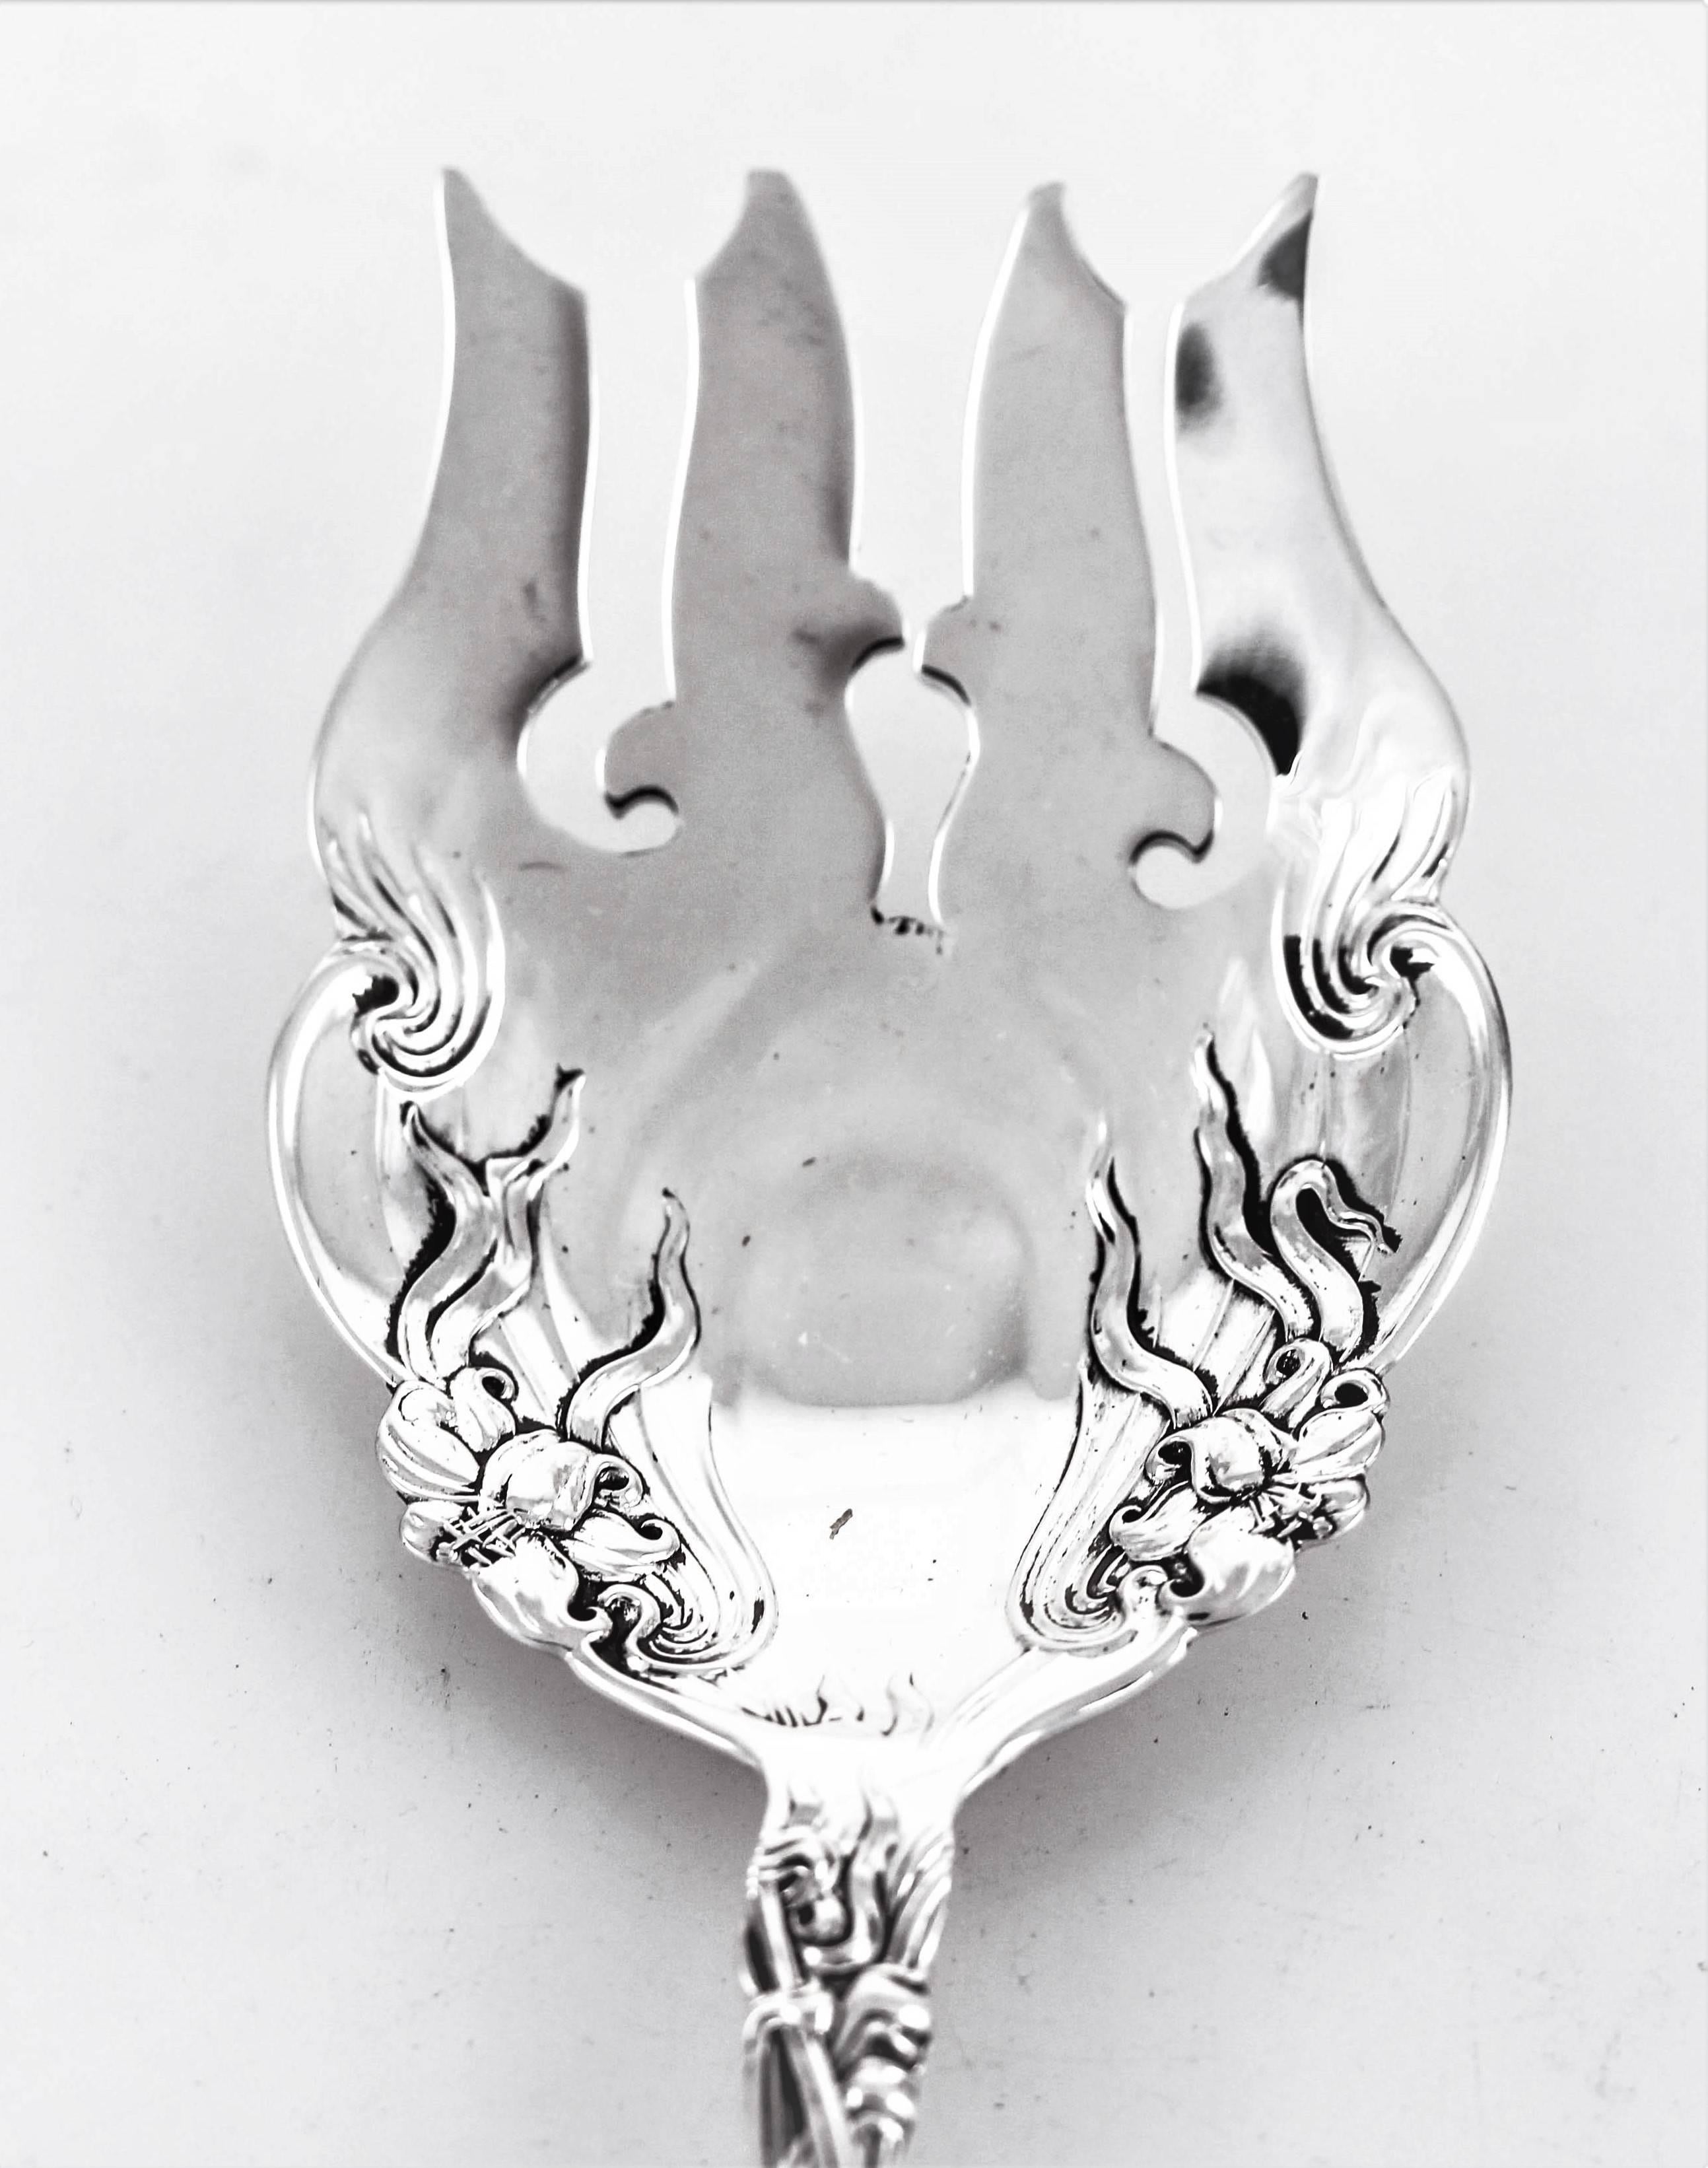 One of the all time most beautiful patterns by the International Silver Company. Drawing on the Art Nouveau period of the early 1900s blown out flowers and leaves decorate the handle and parts of the tine. A reaction to the academic art of the 19th